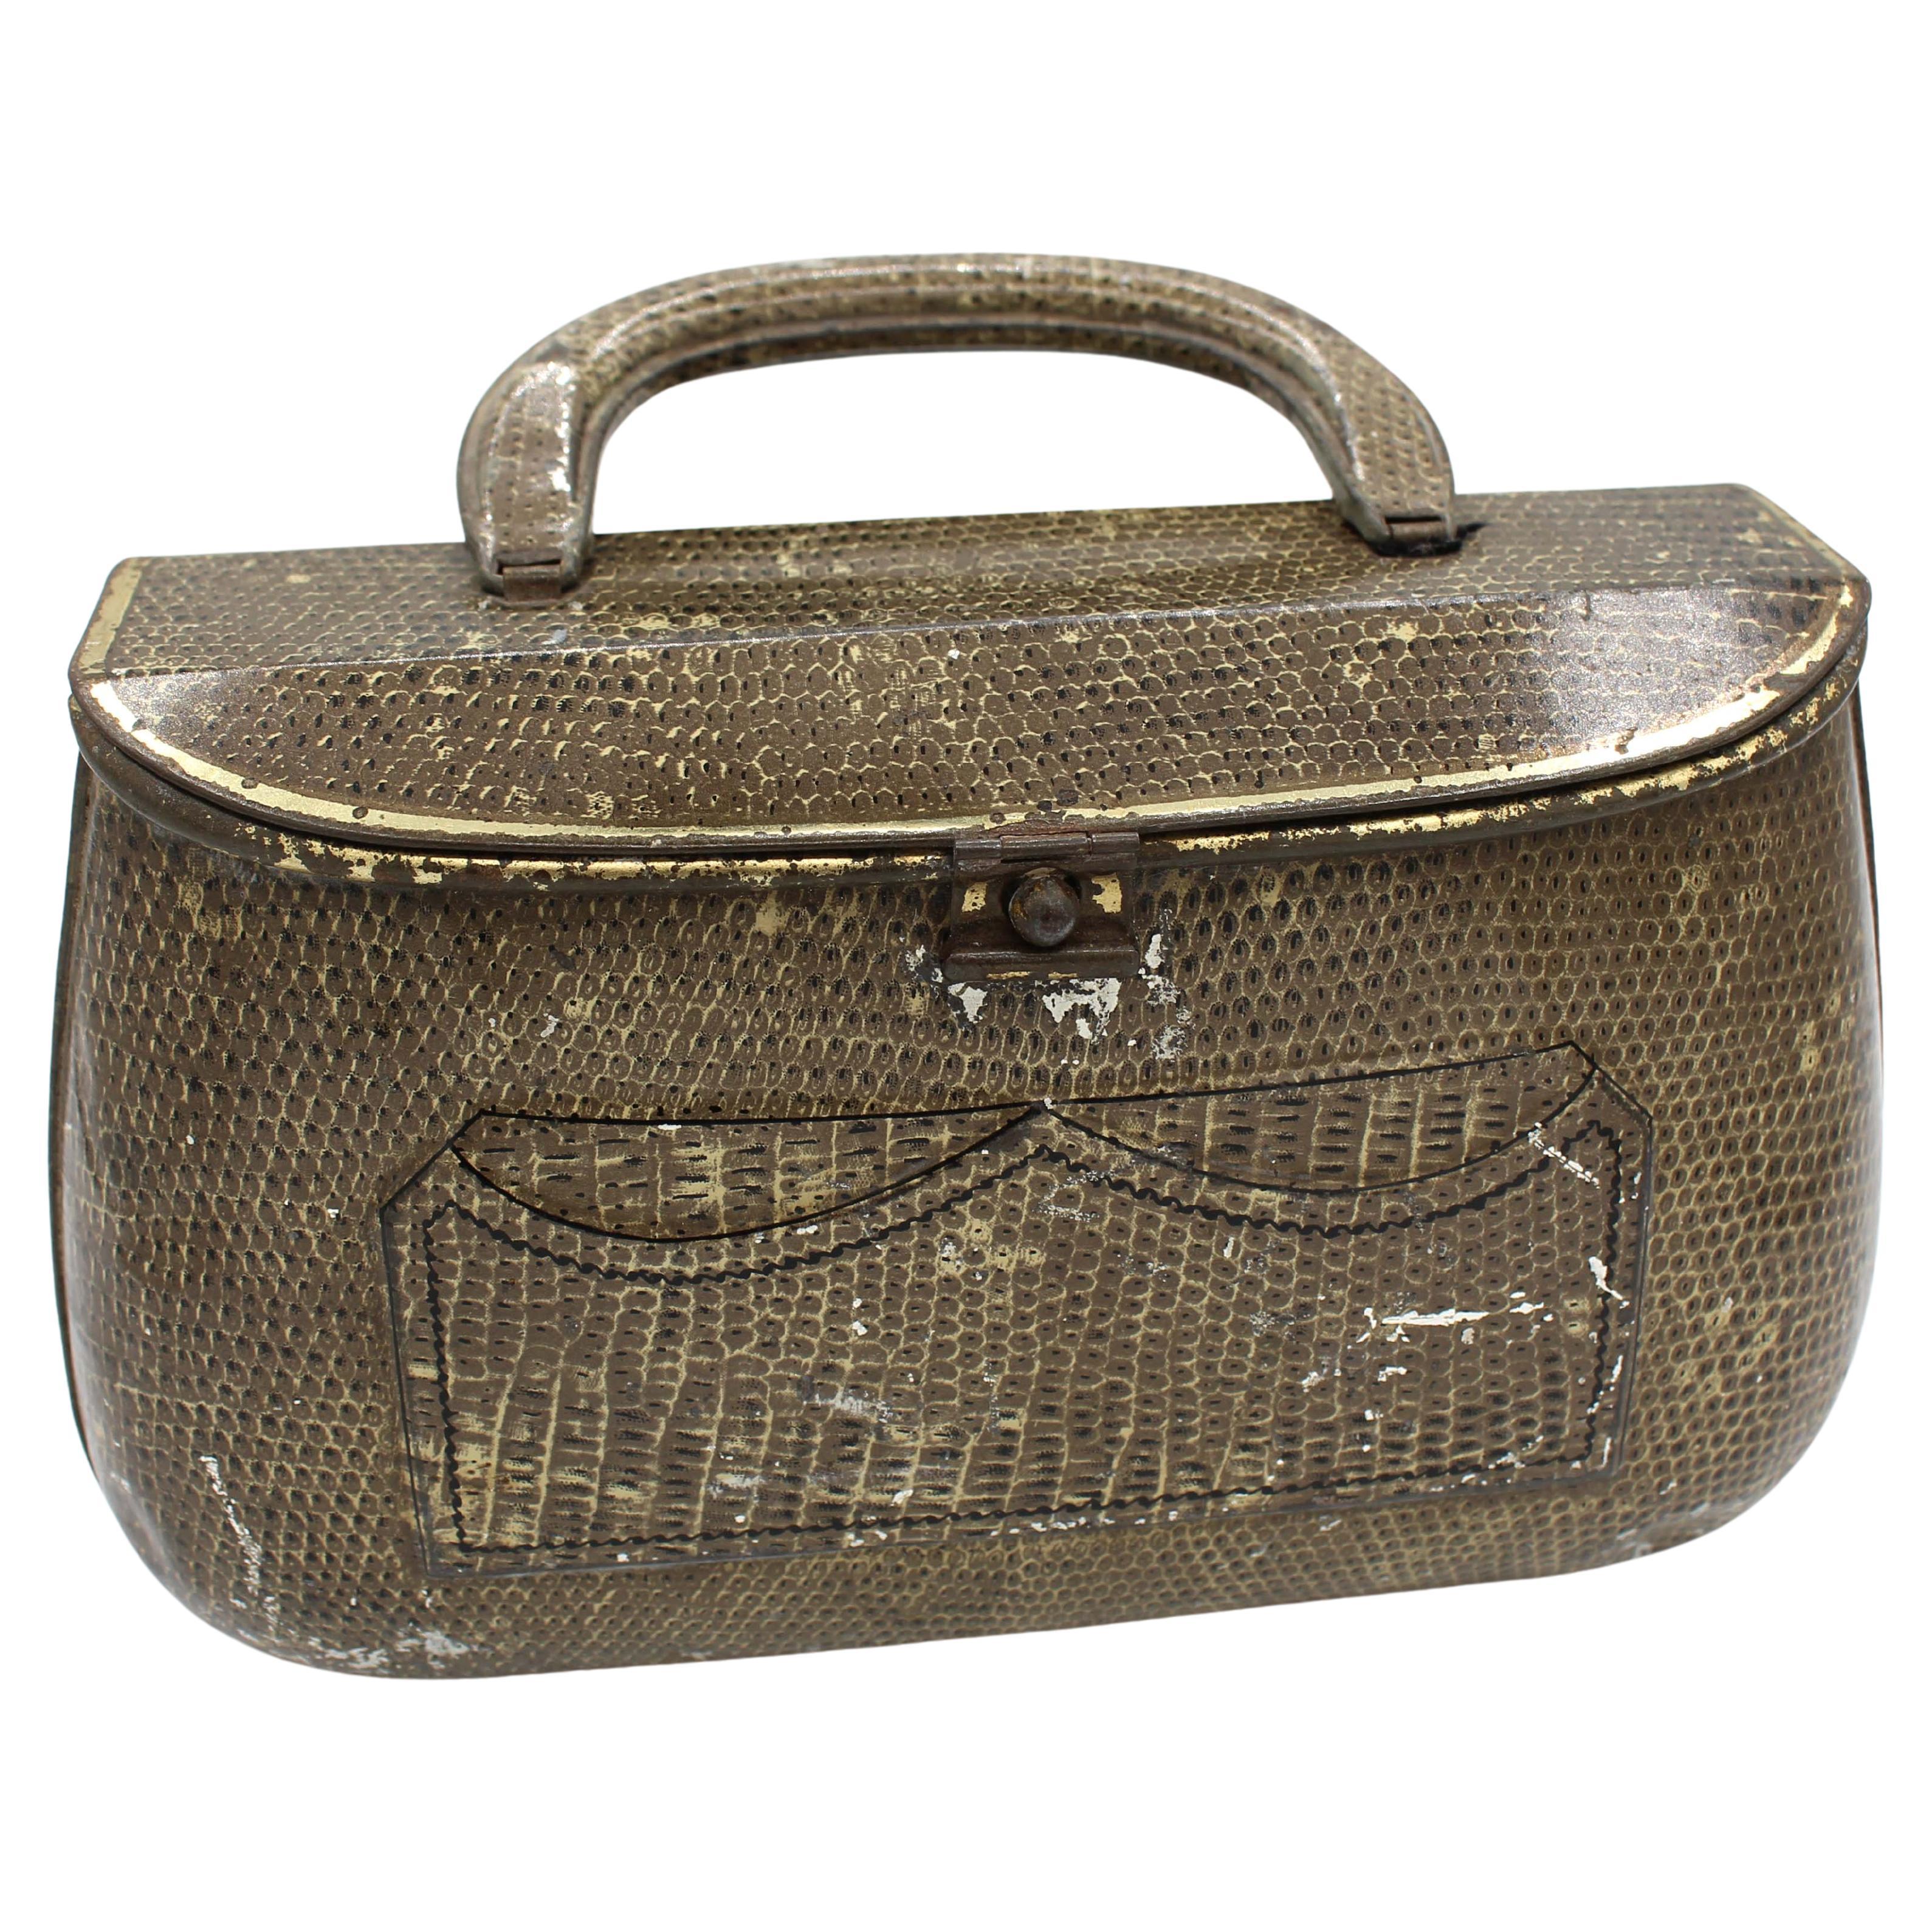 Early 20th Century Satchel Form Biscuit Tin by Huntley & Palmers